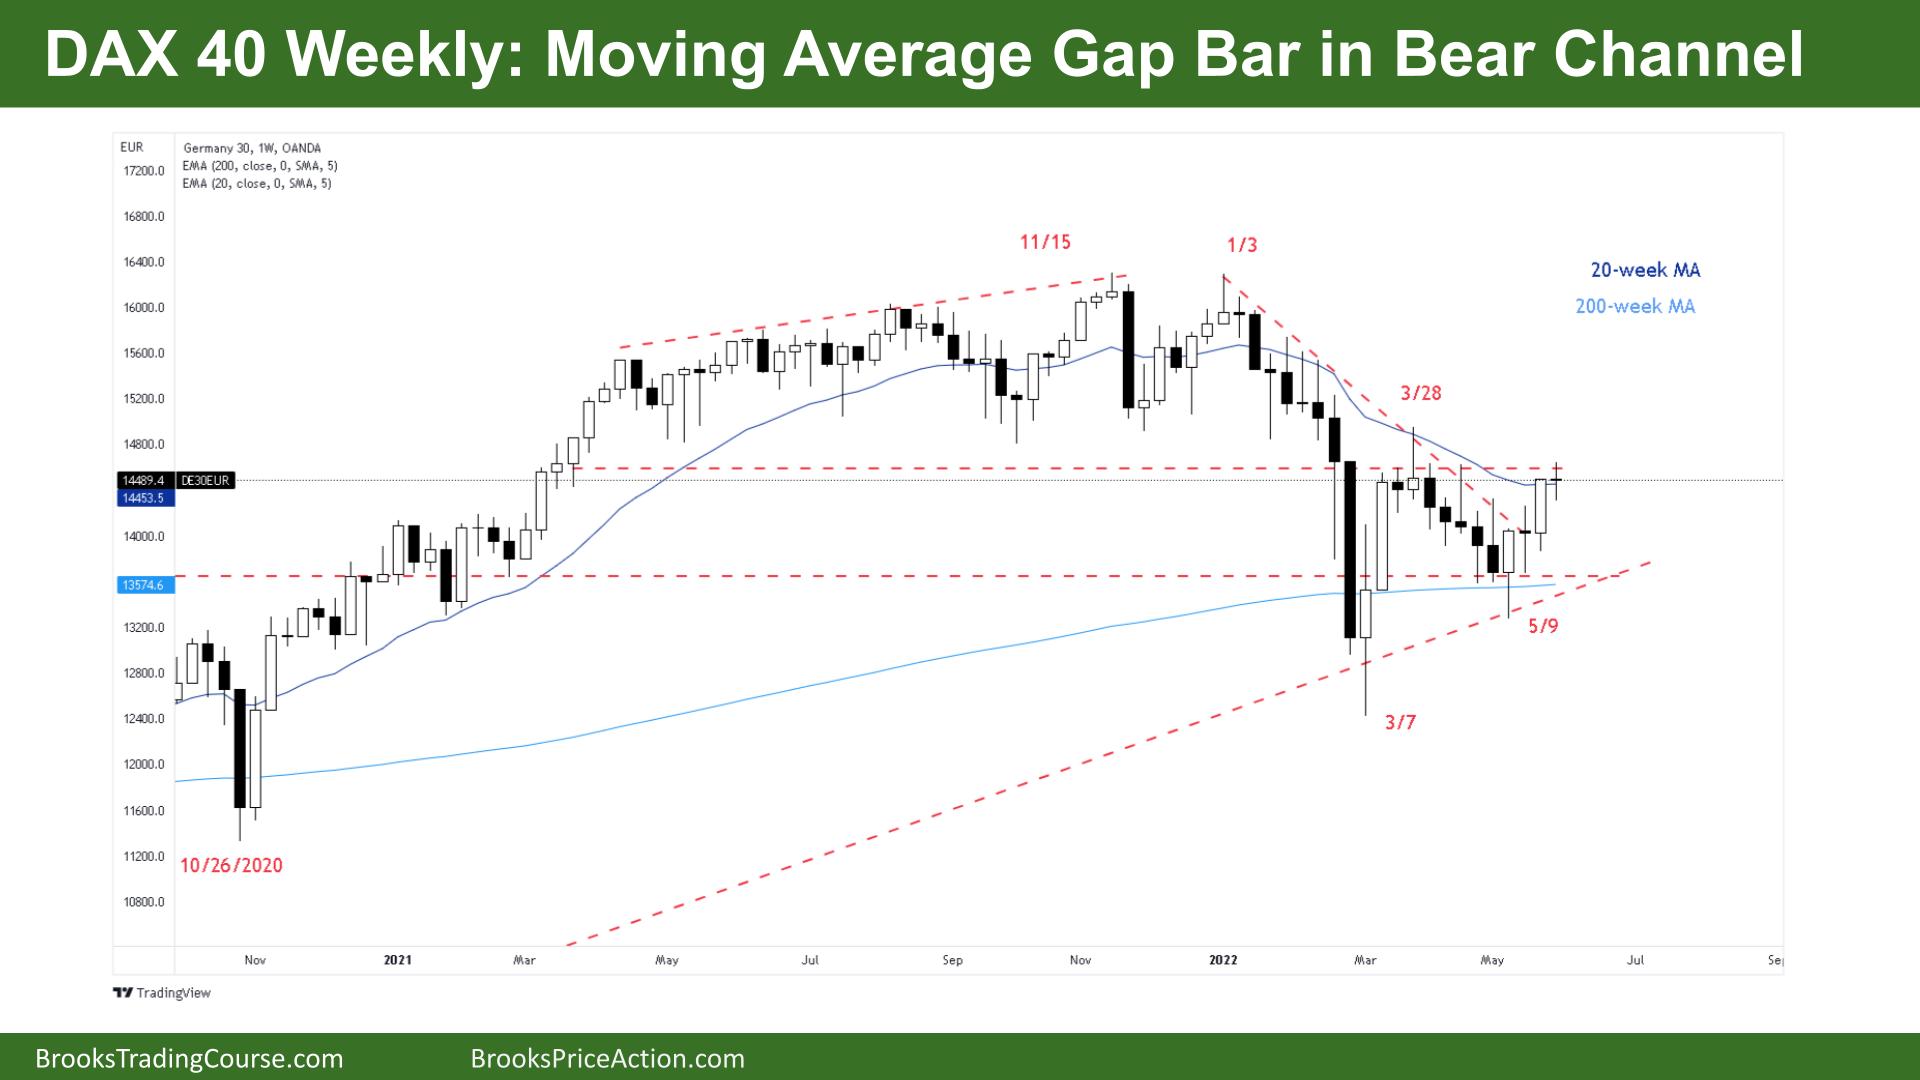 DAX 40 Weekly Chart Moving Average Gap Bar in Bear Channel